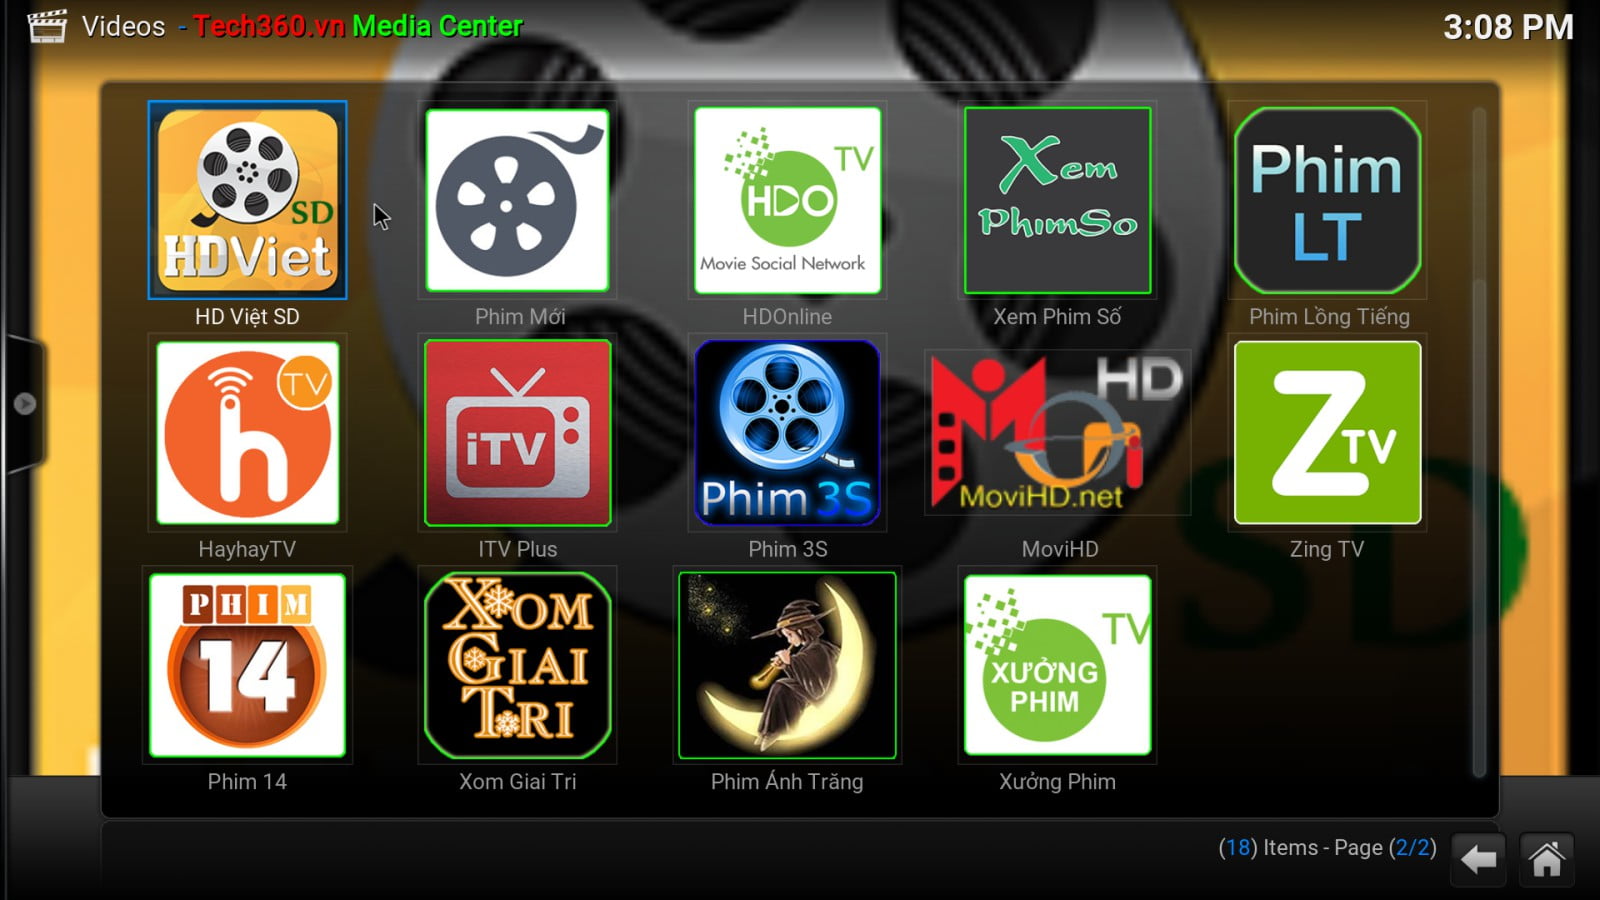 http://androidbox360.vn/android-tv-box-vinabox-x9